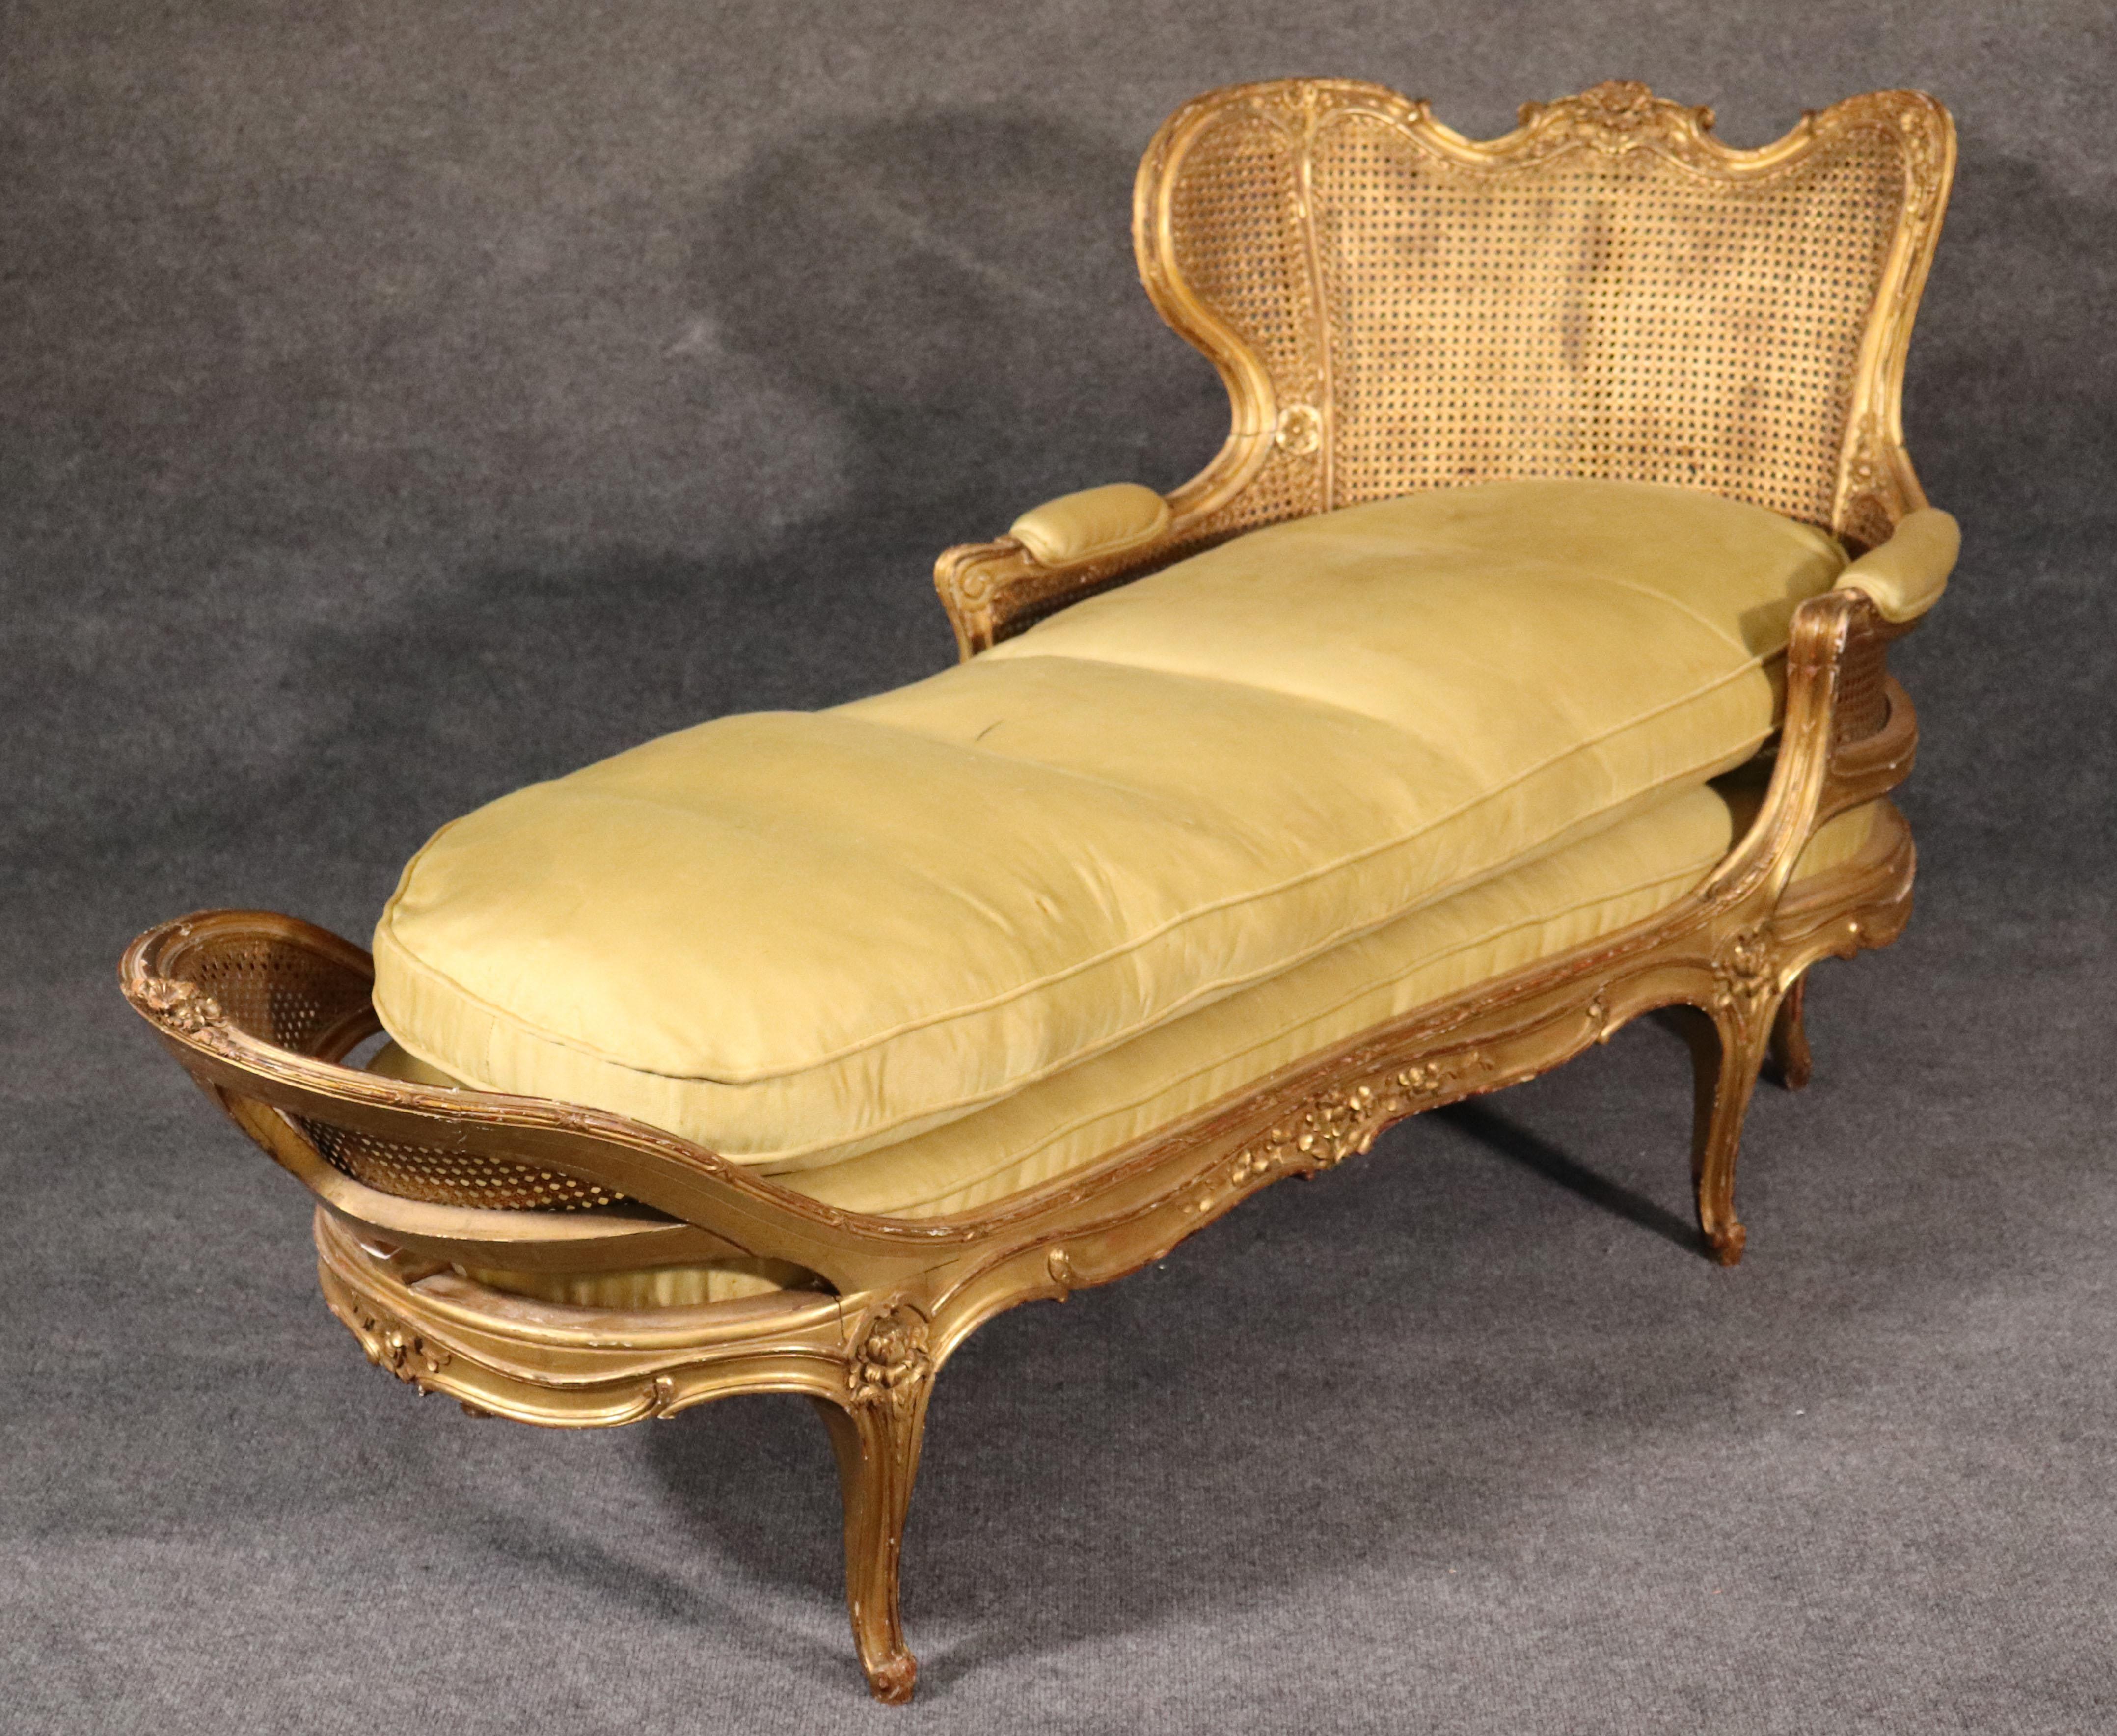 This is truly a work of art and virtually one of the more iconic designs of chaises you're likely to see. The design and detail are superbly executed and the gold leaf is genuine and still retains a fair level of brightness. The upholstery is older